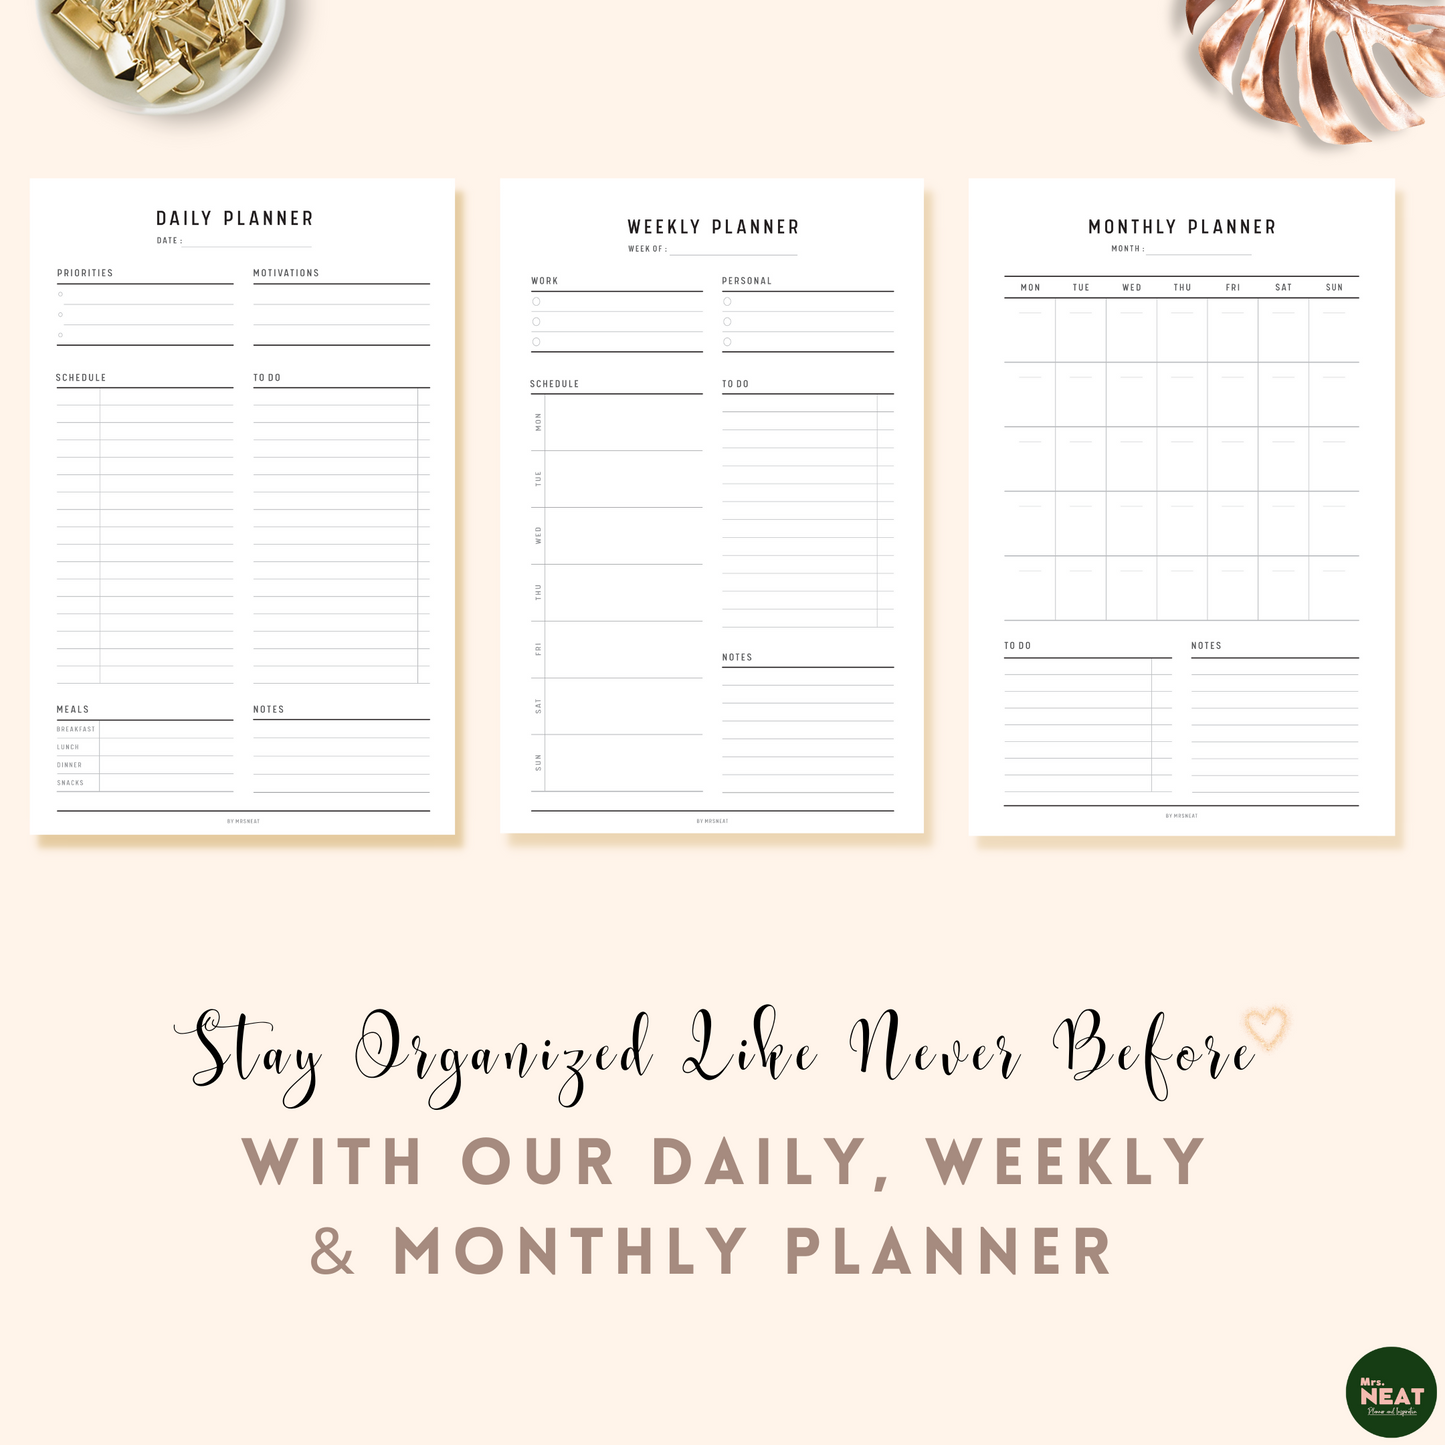 3 Pages of Daily, Weekly and Monthly Planner in Minimalist and Clean Design